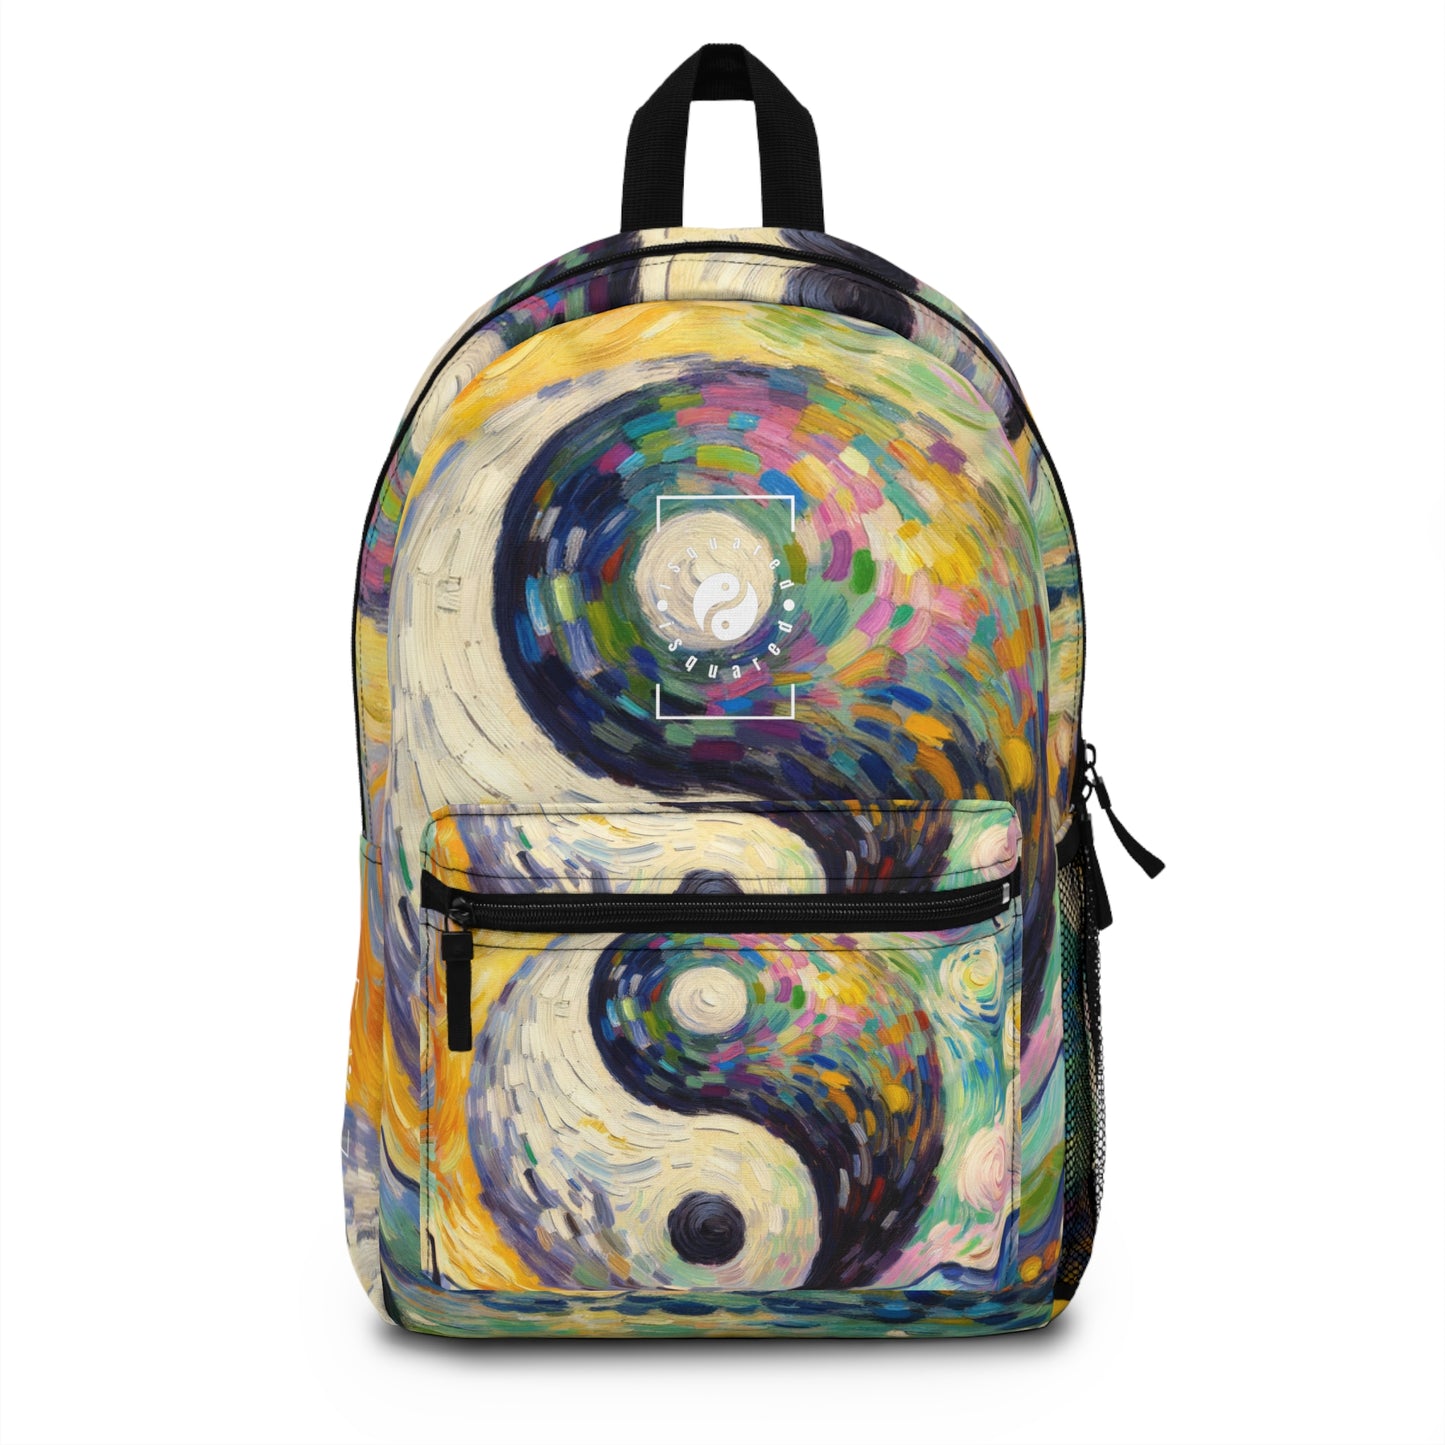 "Spectral Duality: An Impressionist Balance" - Backpack